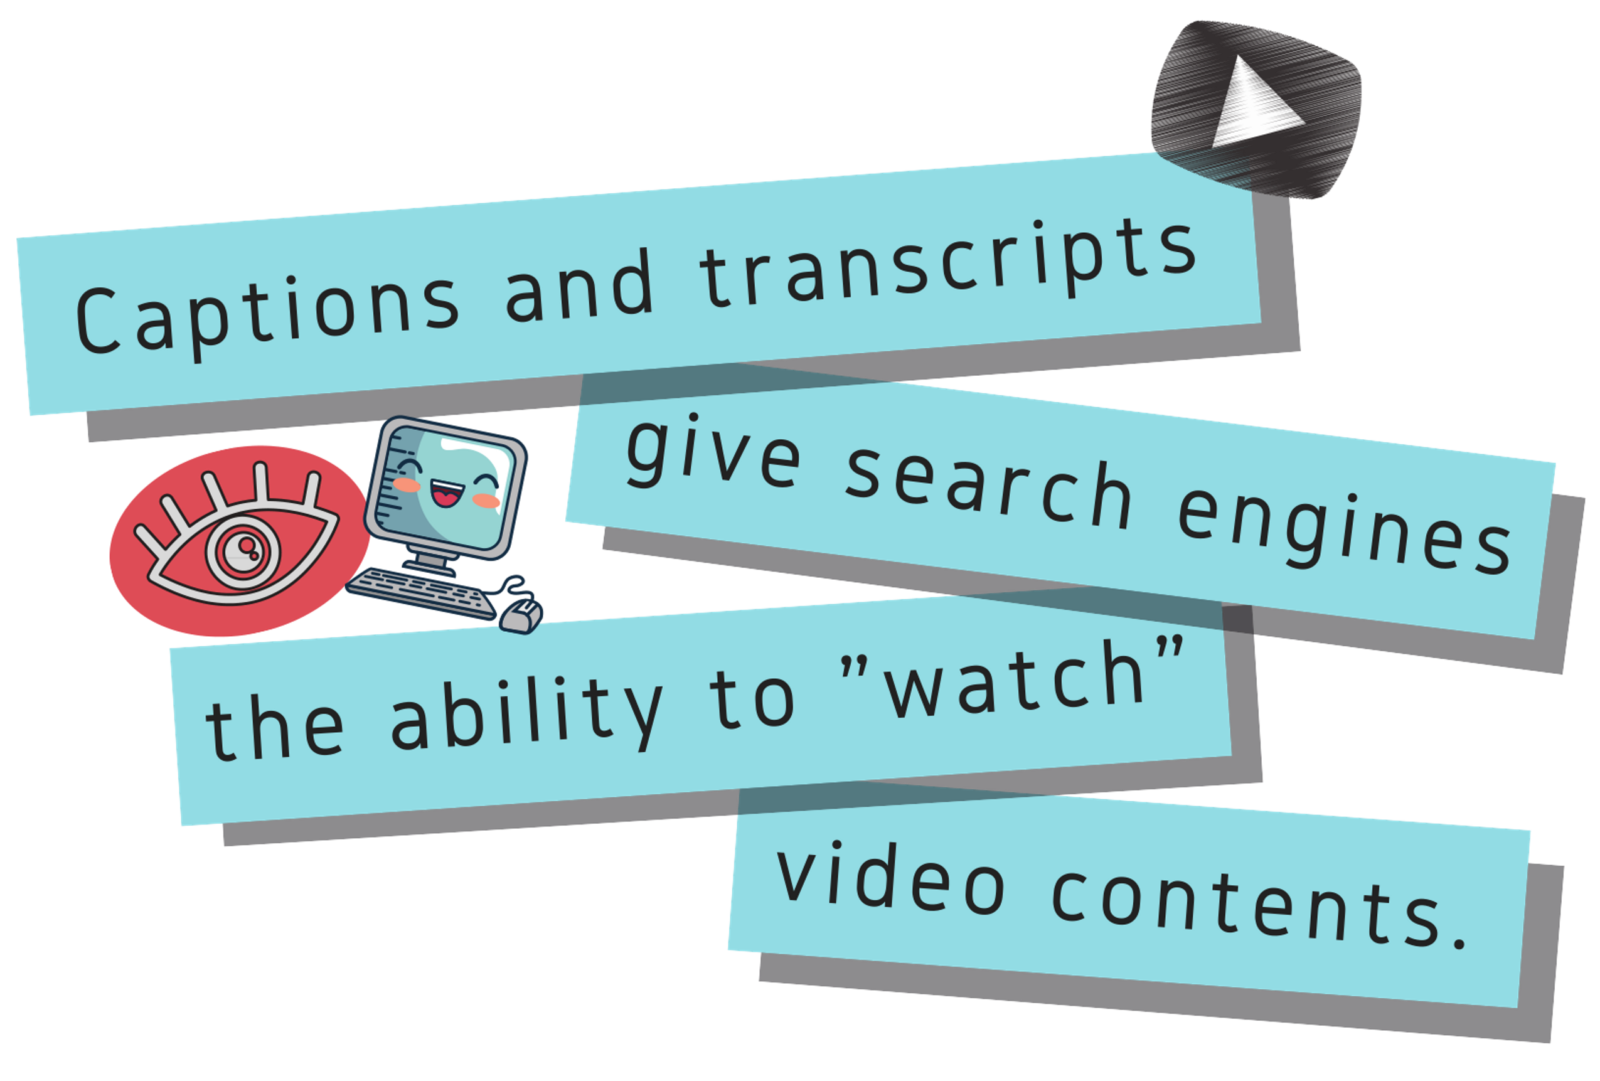 Quote: captions and transcripts give search engines the ability to watch video contents." Light blue background, smiling computer icon, and video play button icon